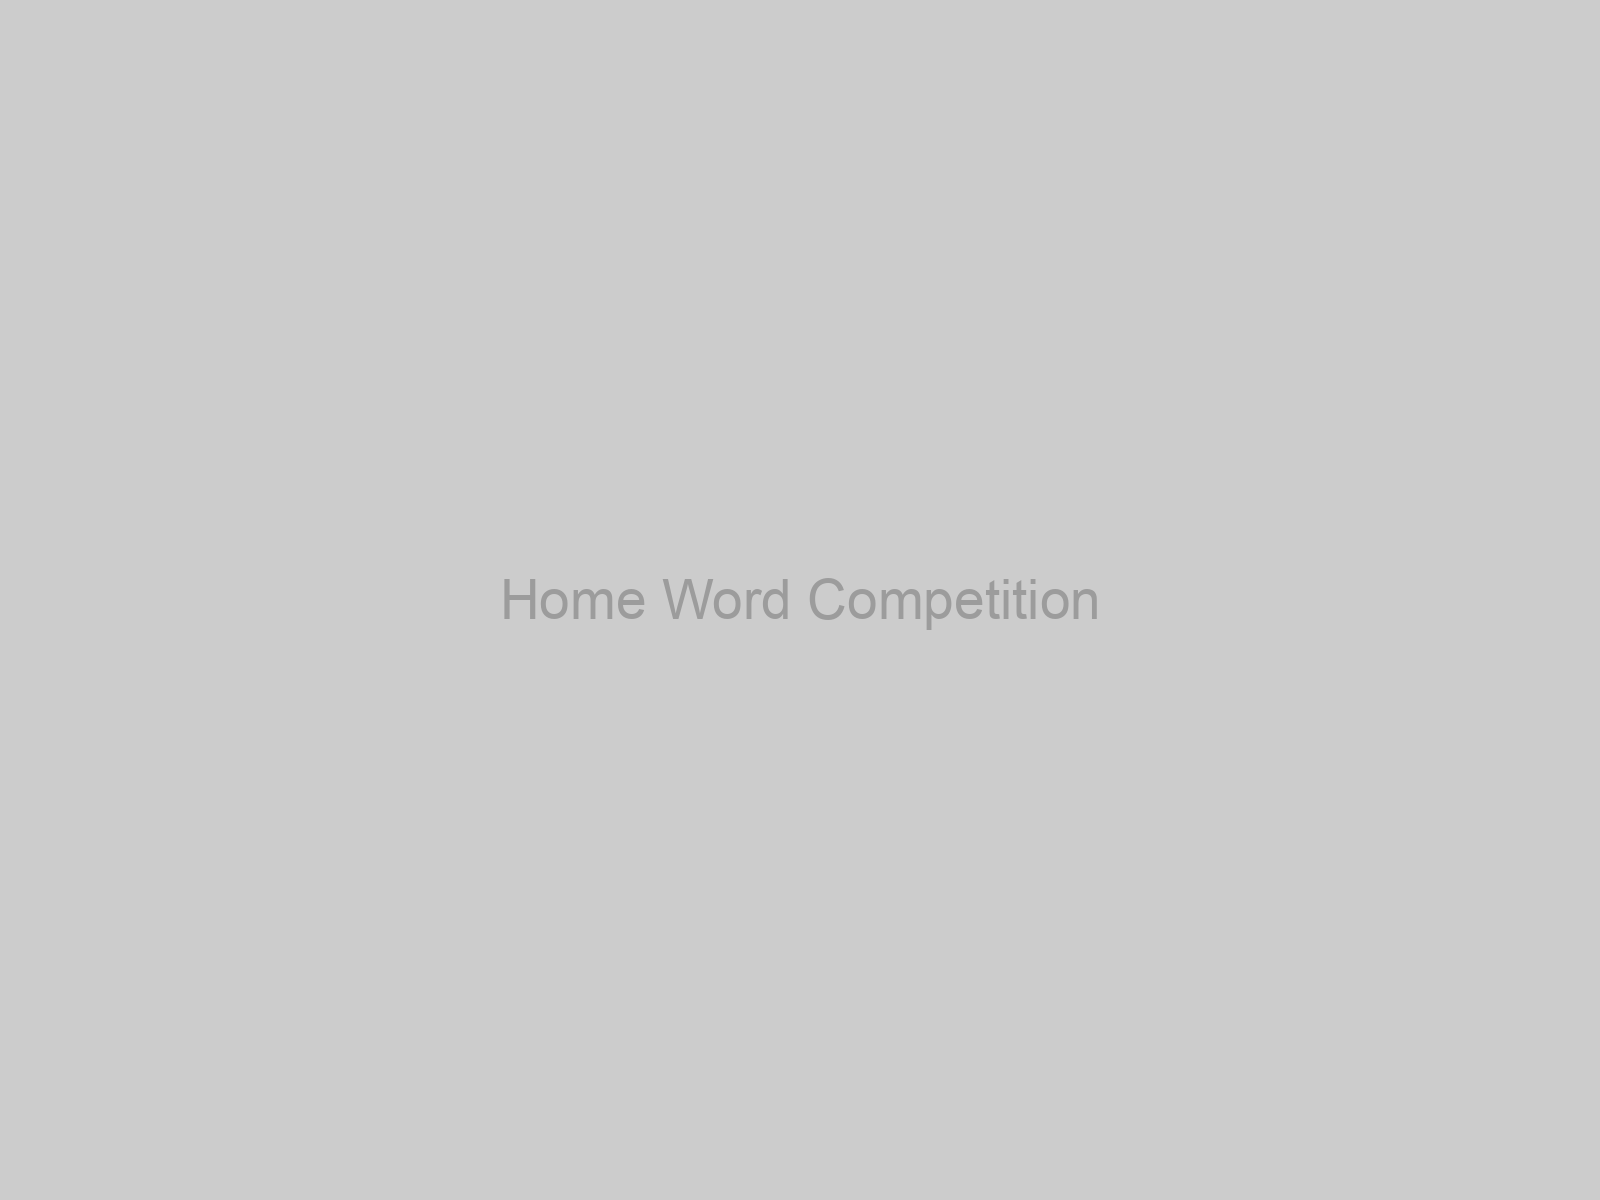 Home Word Competition